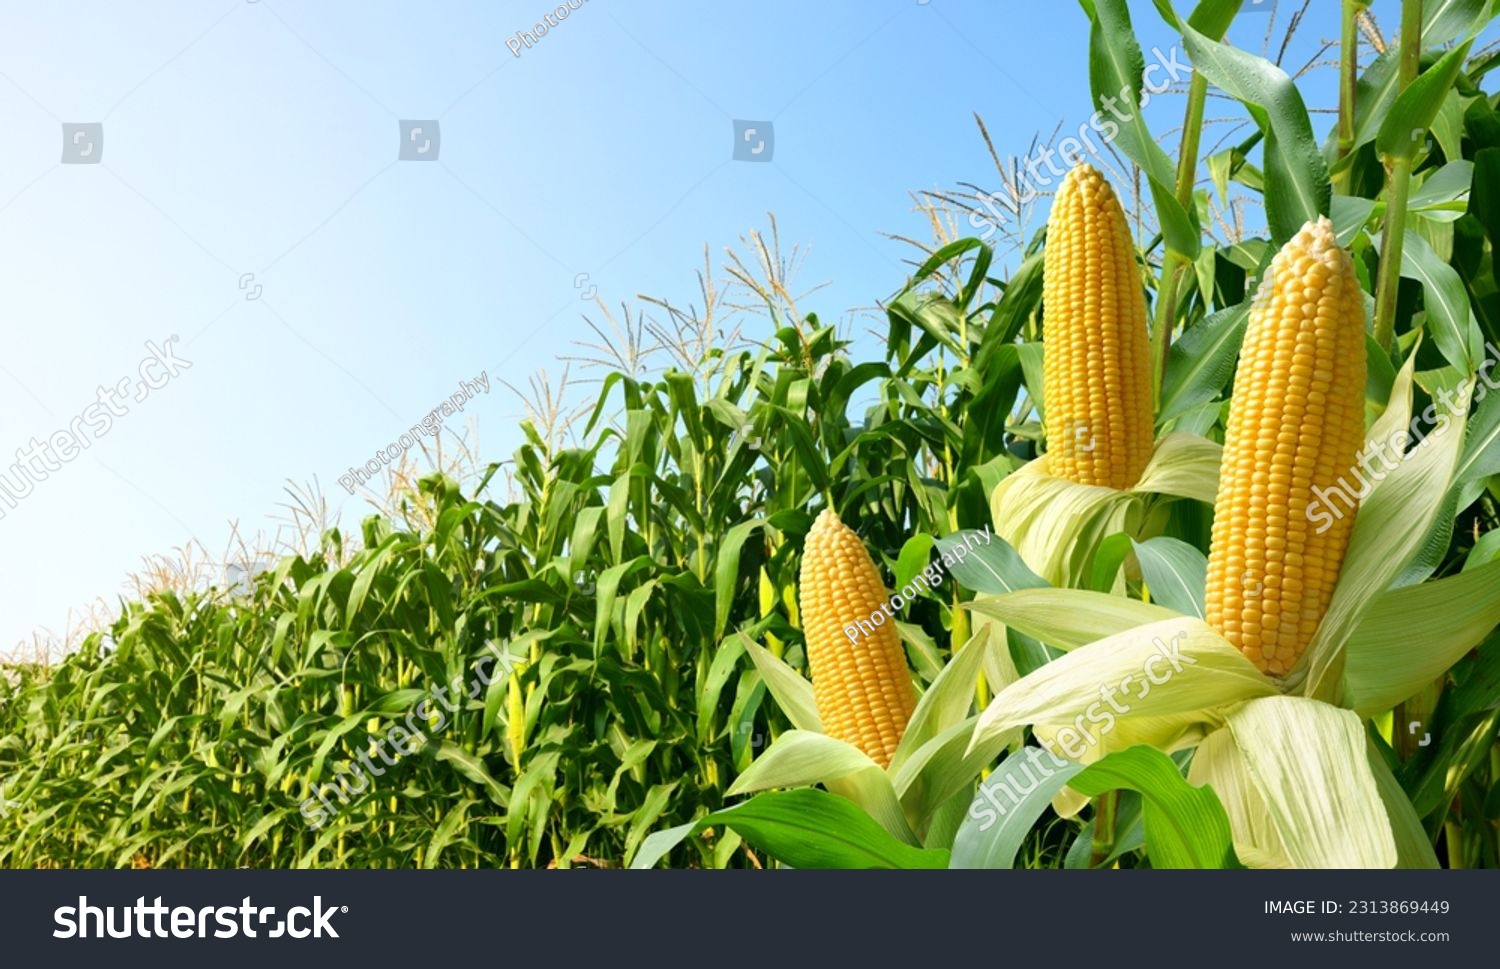 Corn cobs with corn plantation field background. #2313869449